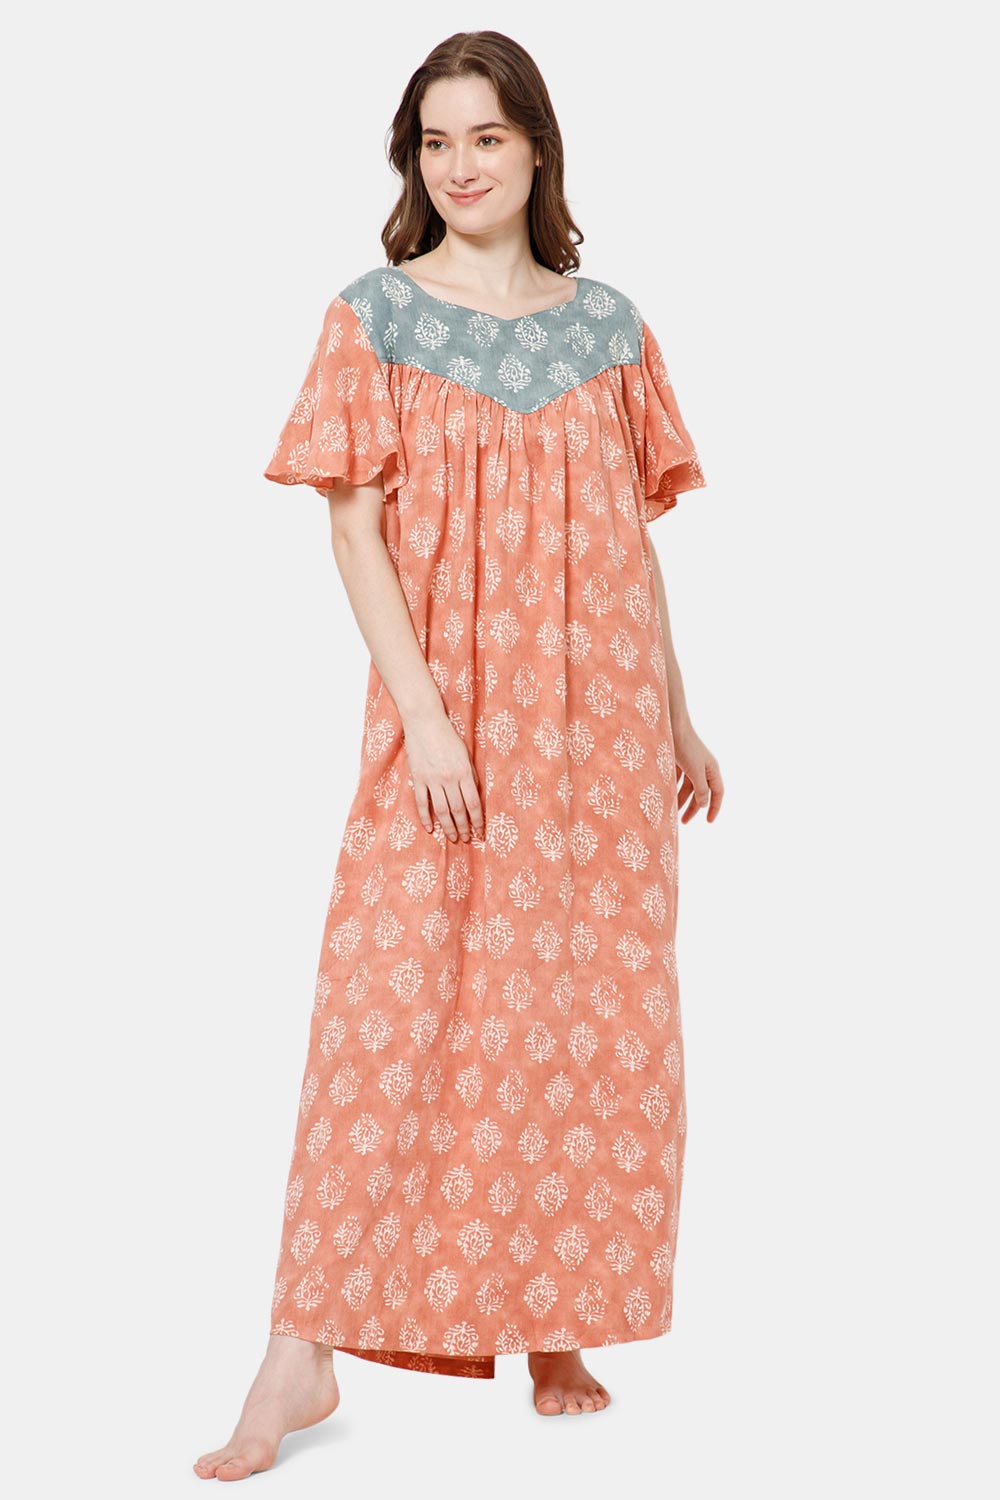 Naidu Hall All Over Printed Nighty with Butterfly Sleeves Diamond Neck - Peach - NT37